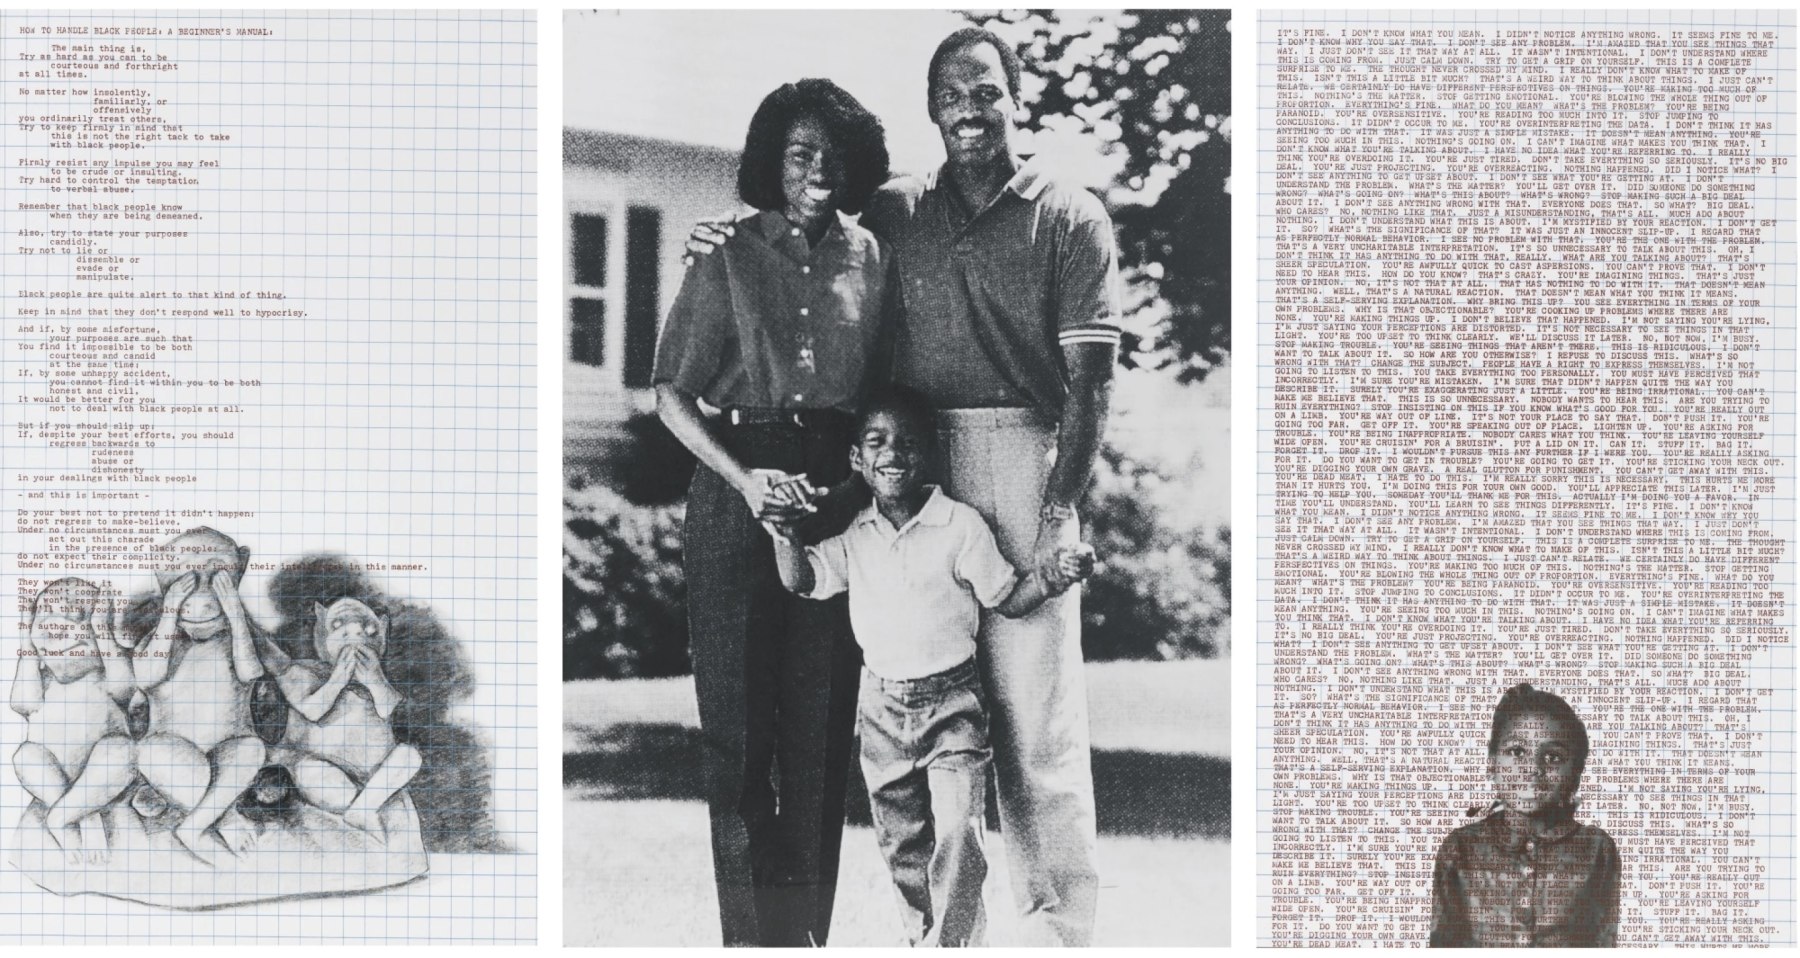 Adrian Piper

Decide Who You Are #25: How to Handle Black People: A Beginner&amp;rsquo;s Manual,&amp;nbsp;1992

Panel #1: &amp;nbsp;pencil drawing on graph paper enlarged to 72 x 42 inches with overprinted red text

Panel #2: &amp;nbsp;photo enlarged to 72 x 55 7/16 inches

Panel #3: &amp;nbsp;photomontage on graph paper enlarged to 72 x 42 inches